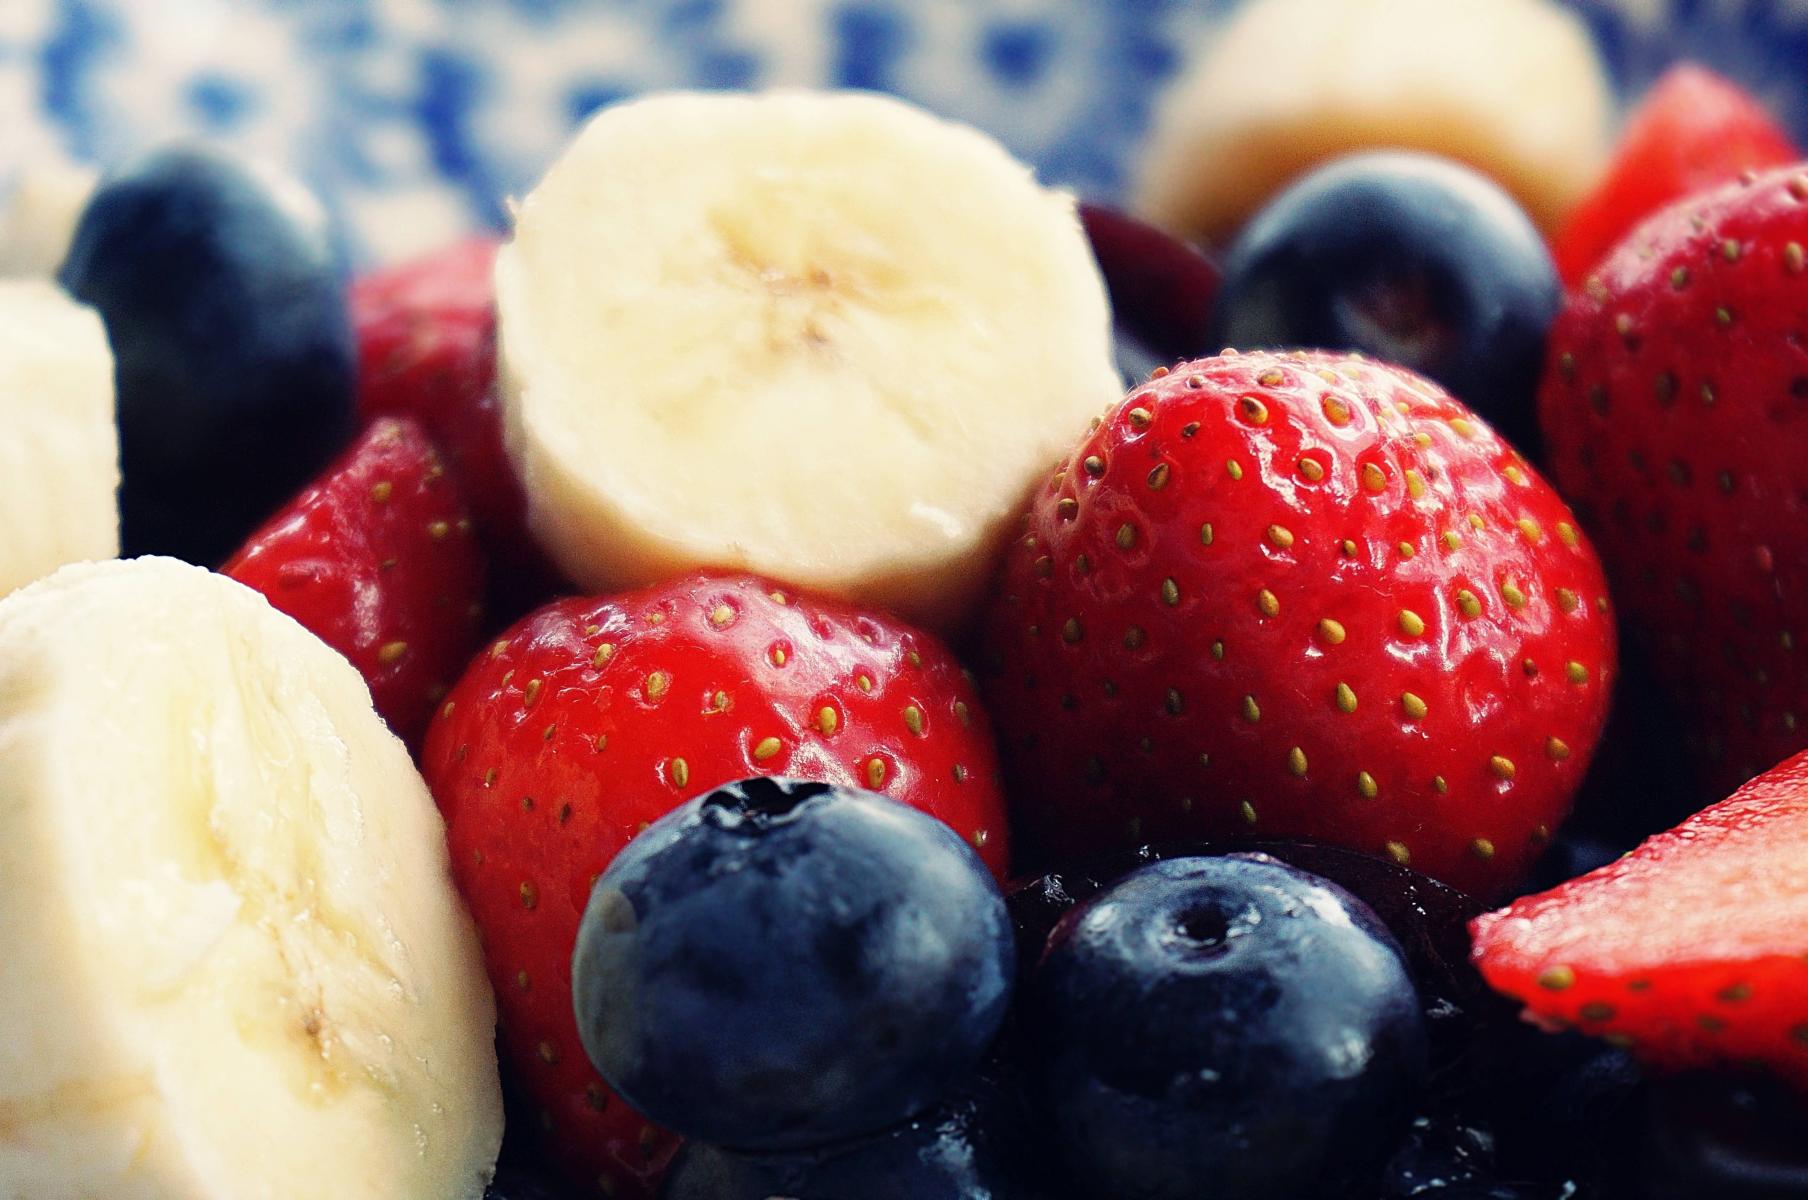 Banana slices, strawberries, and blueberries